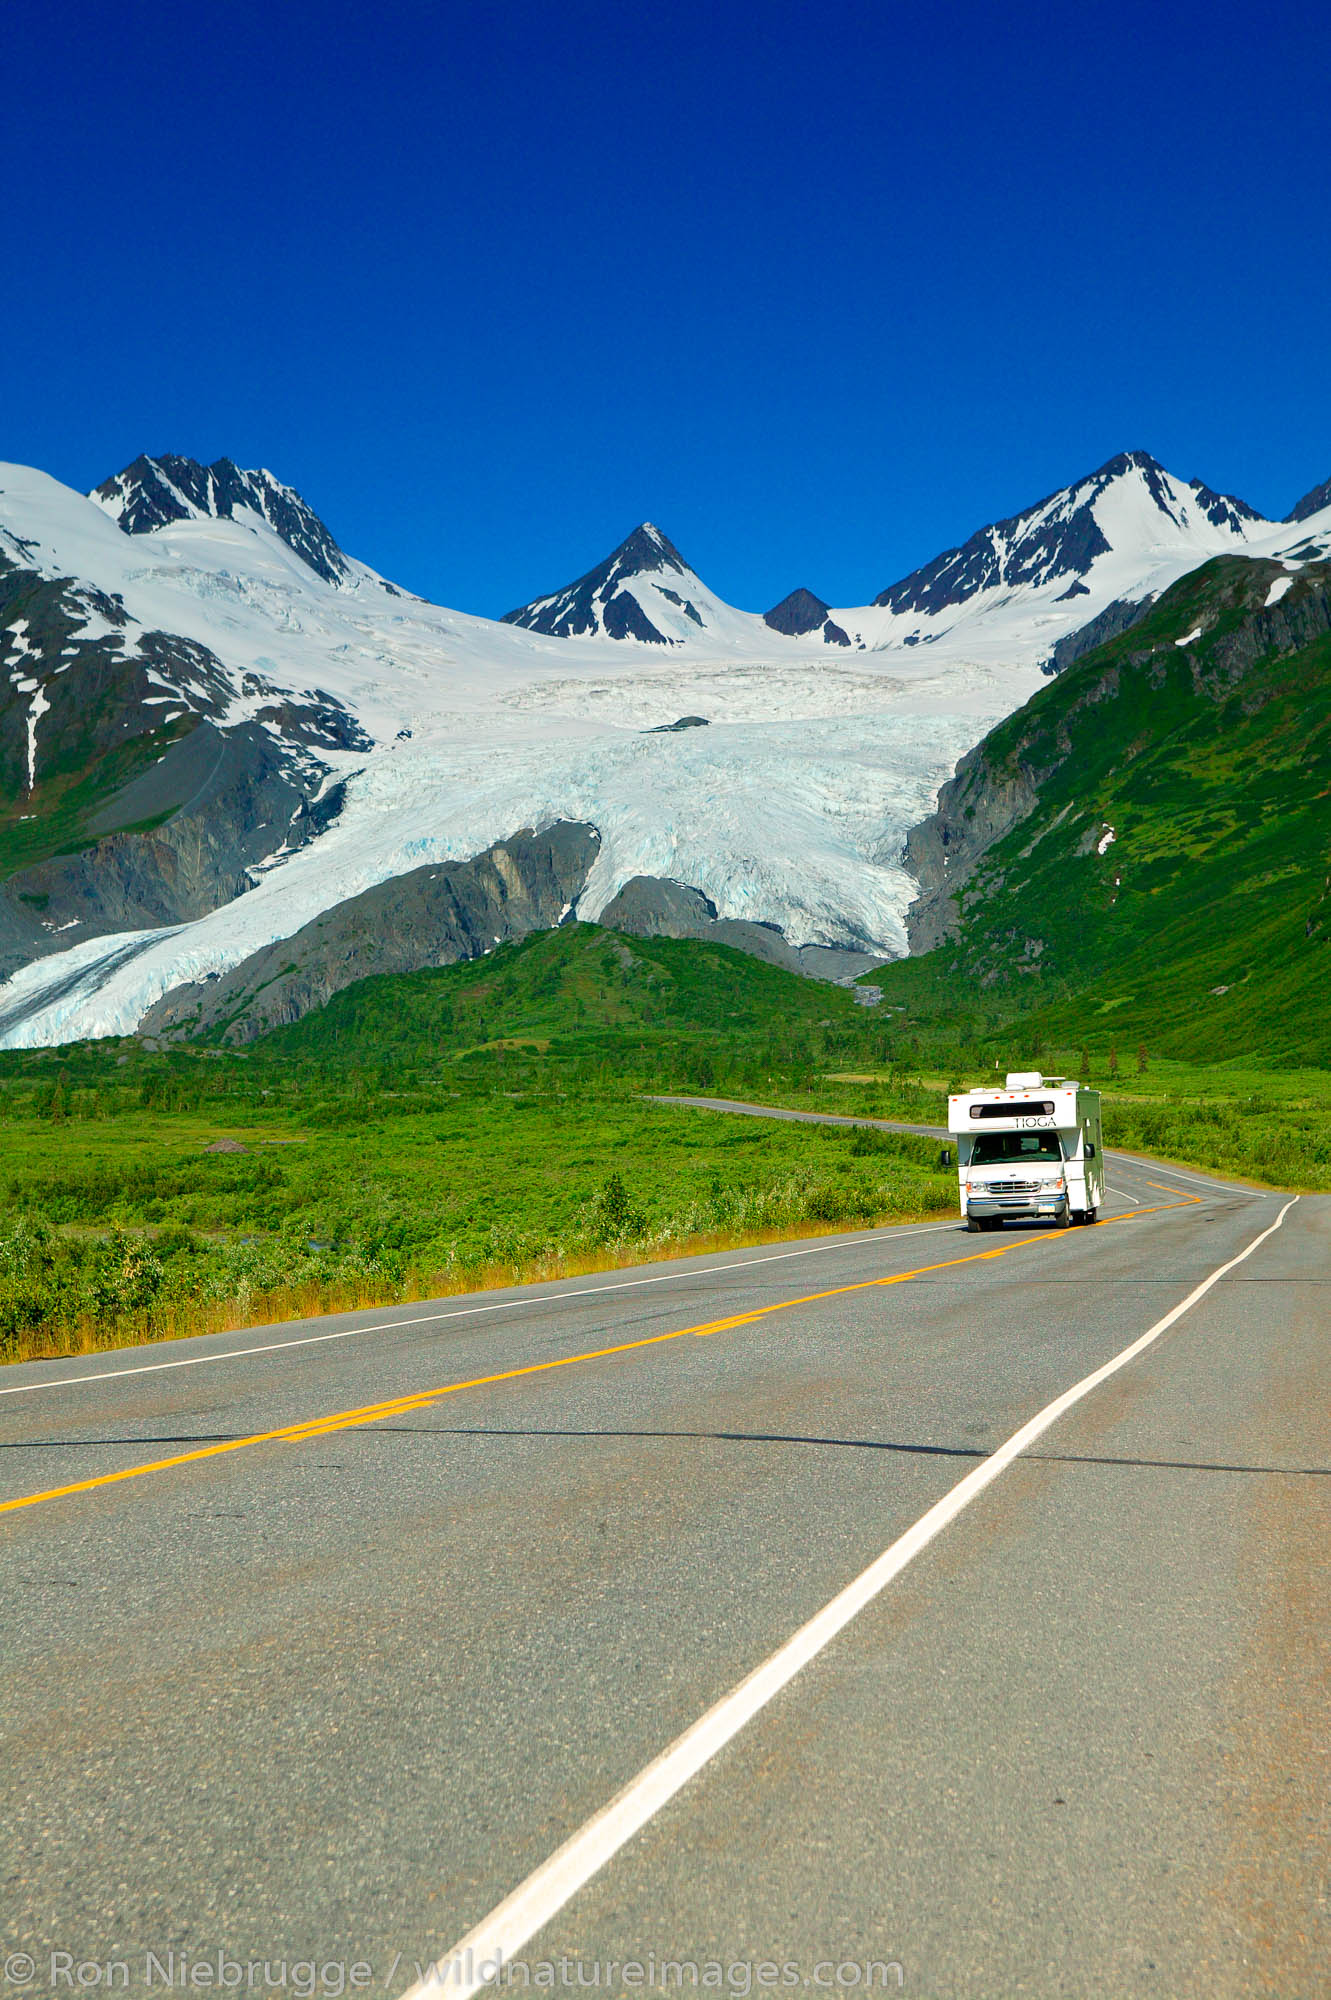 The Richardson Highway travels through she Chugach Mountains as it passes over Thompson Pass on the way to Valdez, Alaska.